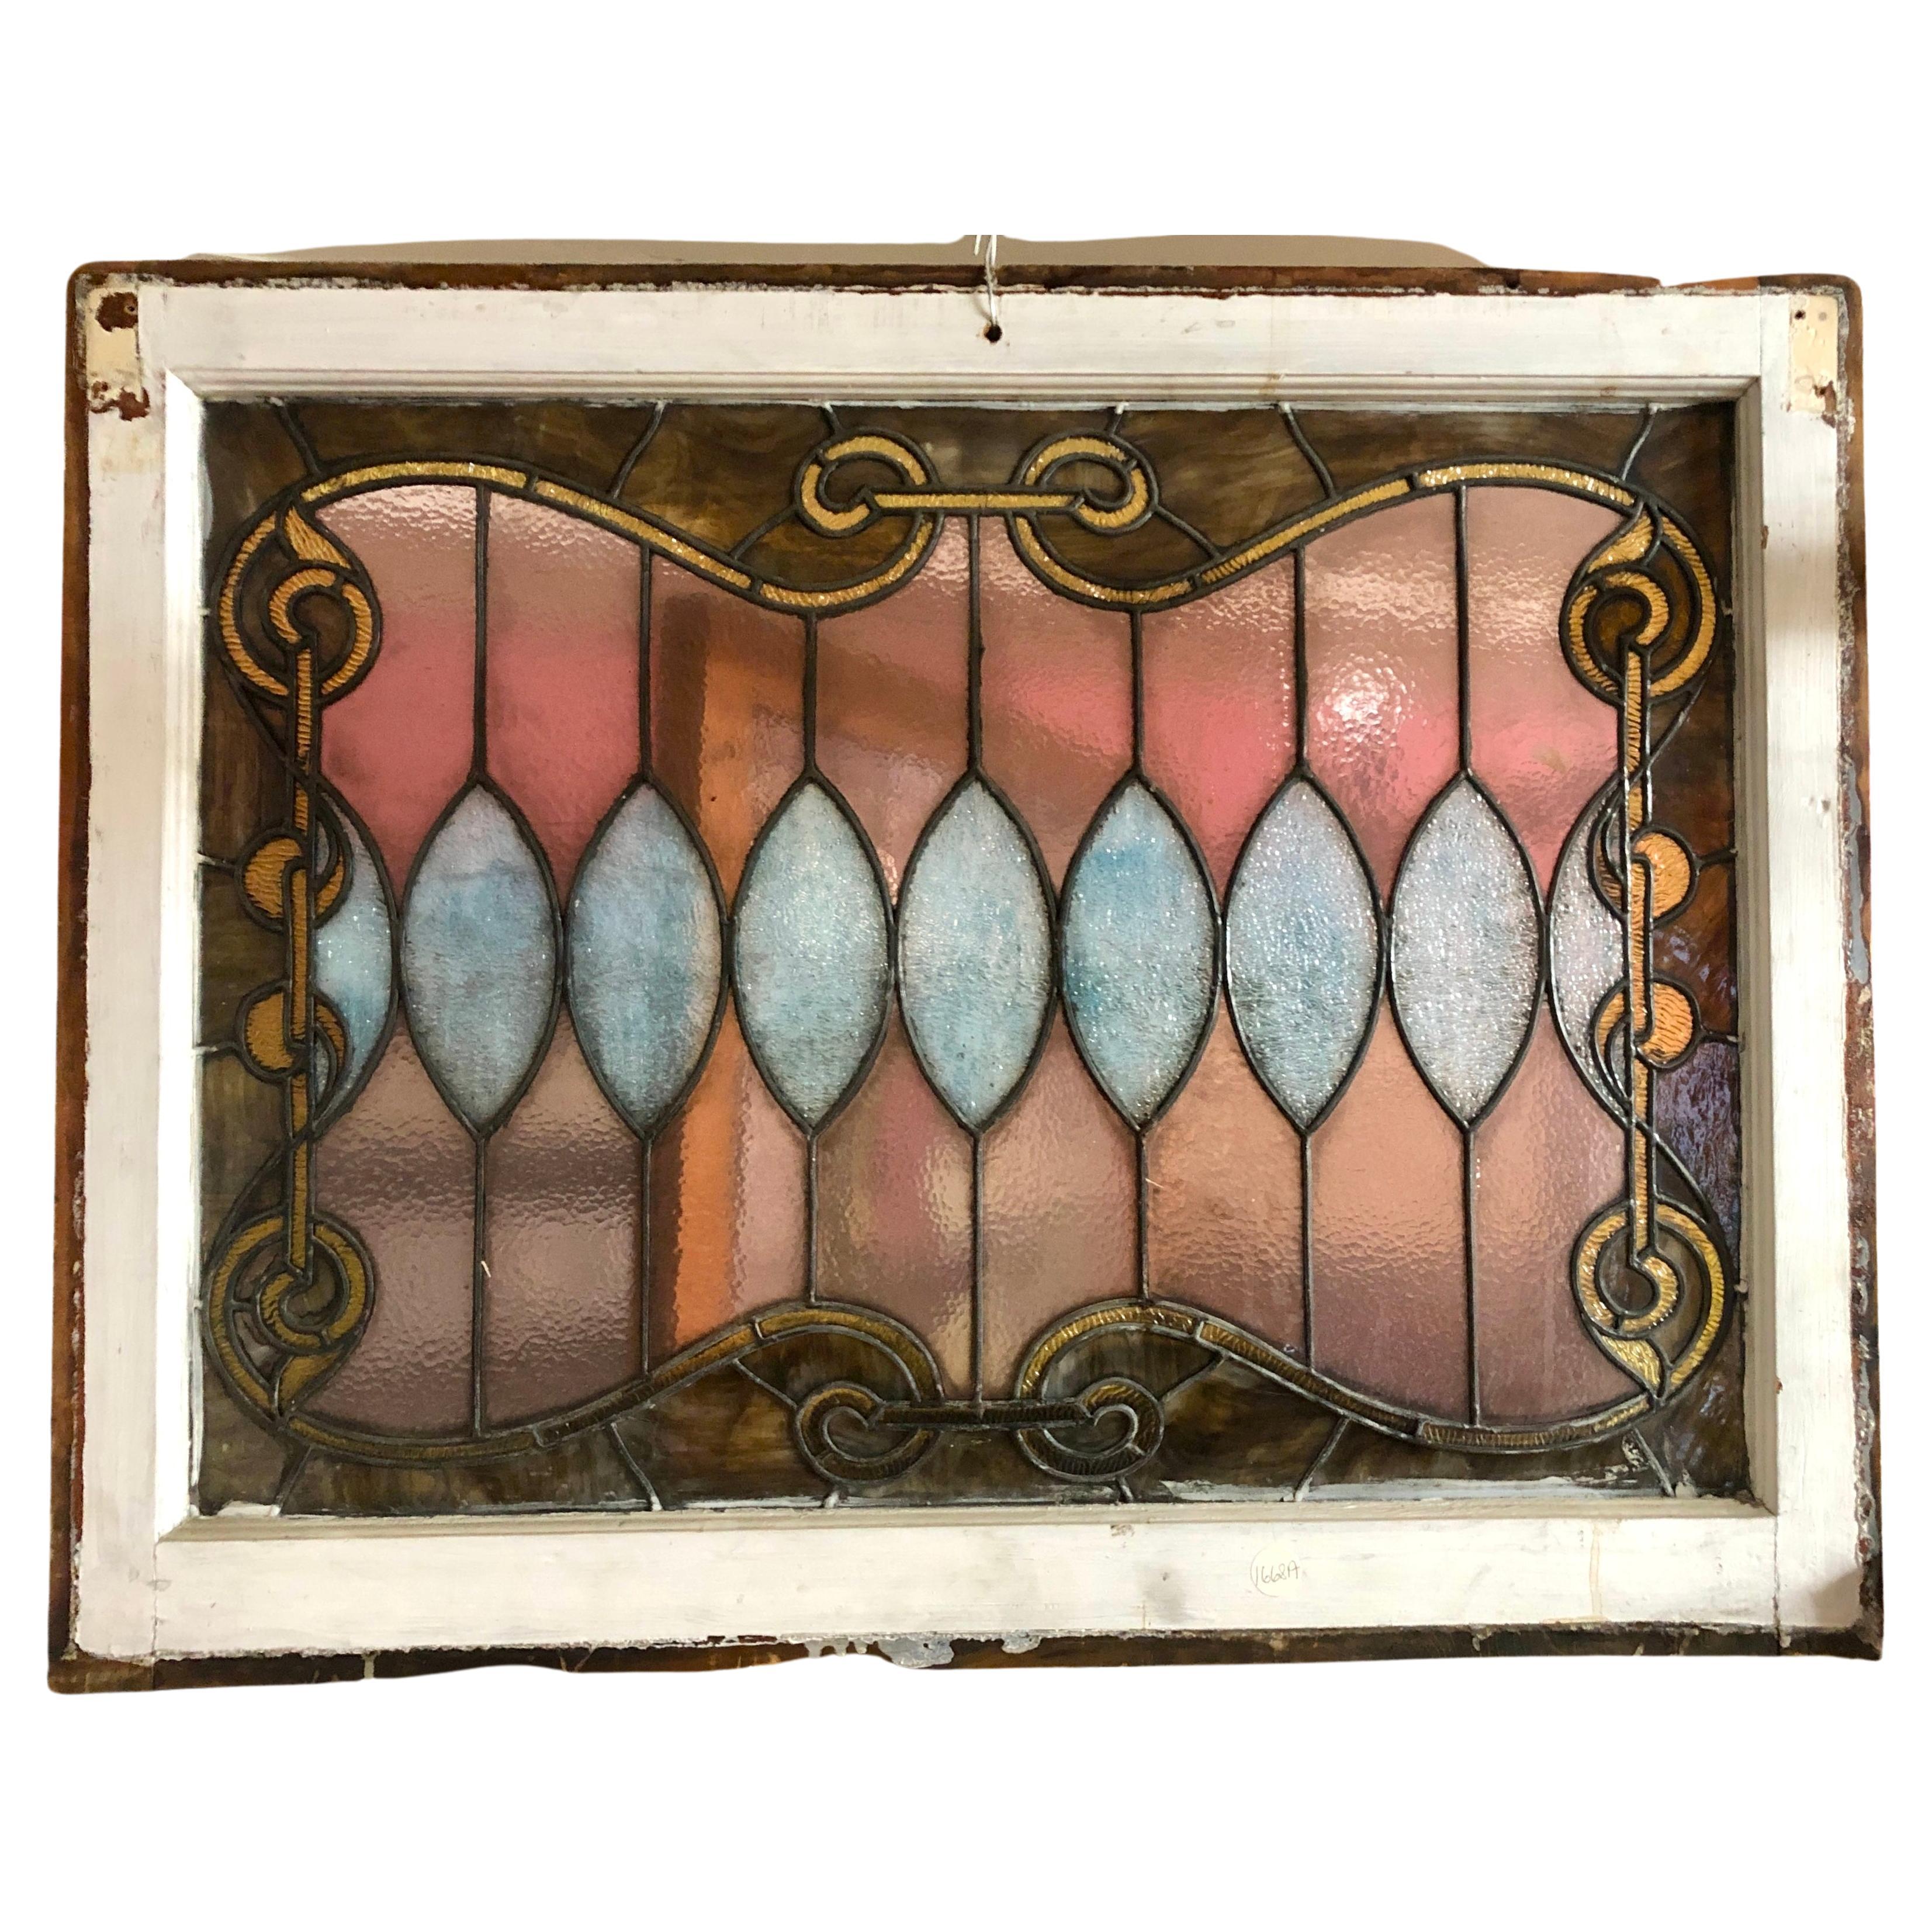 American turn of the century window with stained glass and leaded decoration. Beautiful colors to brighten your room!
Currently housed in a temporary wooden frame - the overall dimensions are for the stained glass and the frame.
Located in NY